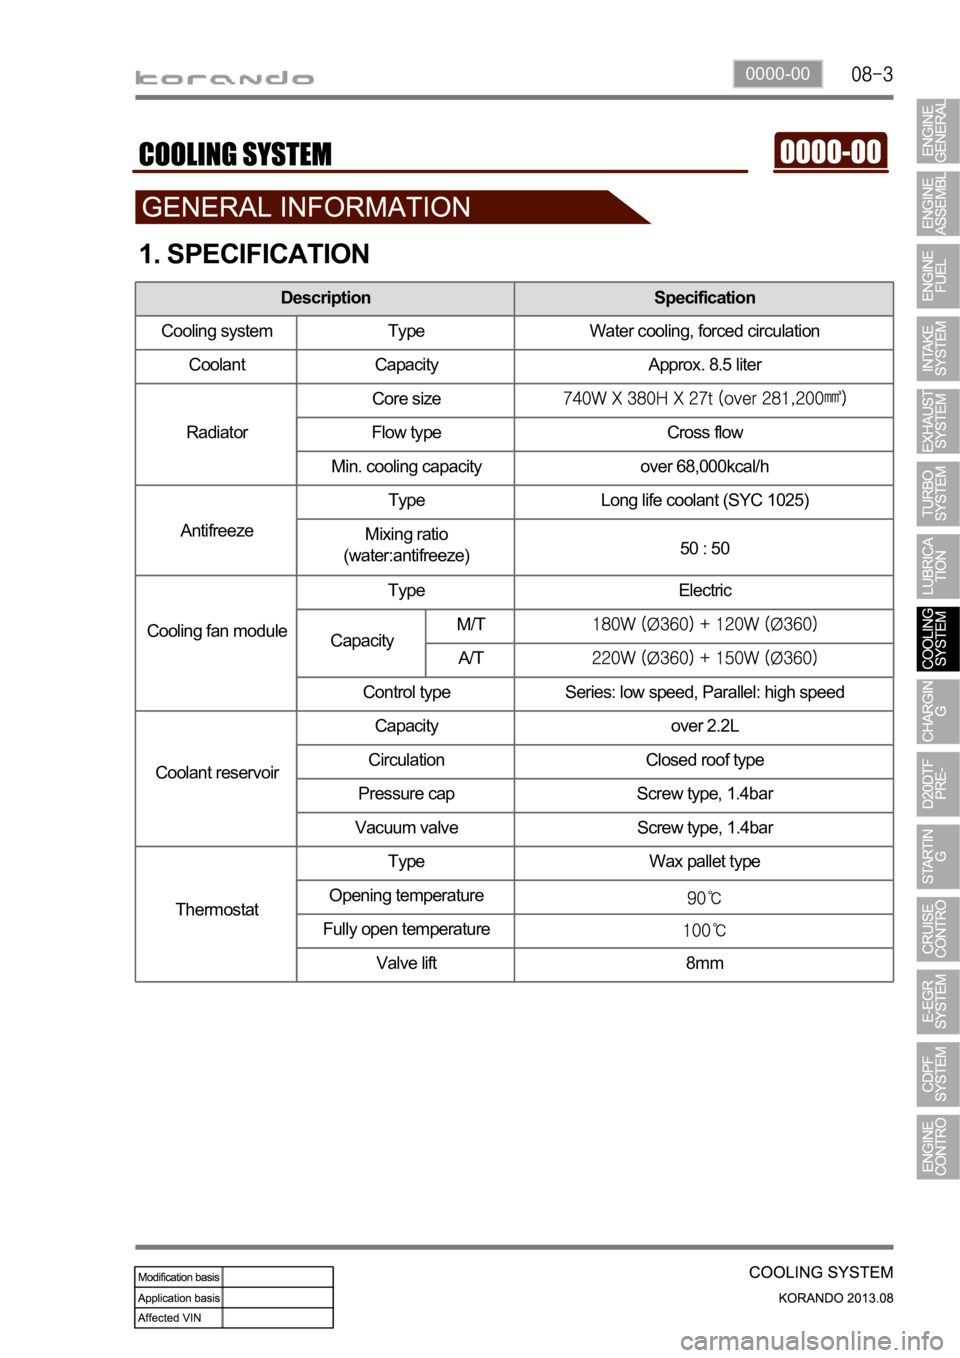 SSANGYONG KORANDO 2013  Service Manual 0000-00
1. SPECIFICATION
Description Specification
Cooling system Type Water cooling, forced circulation
Coolant Capacity Approx. 8.5 liter
RadiatorCore size
Flow type Cross flow
Min. cooling capacity